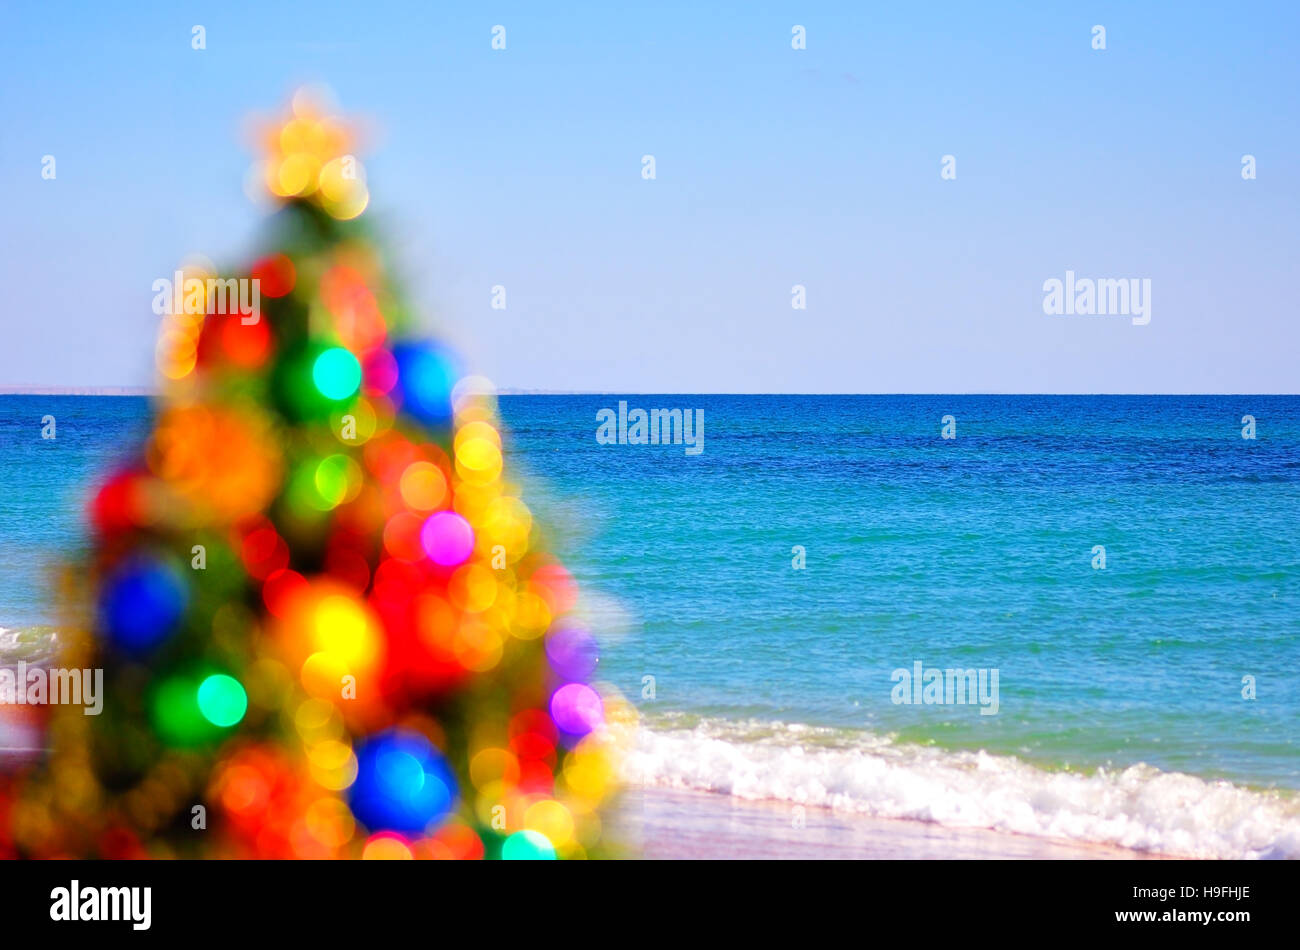 Christmas Tree on beach Banque D'Images